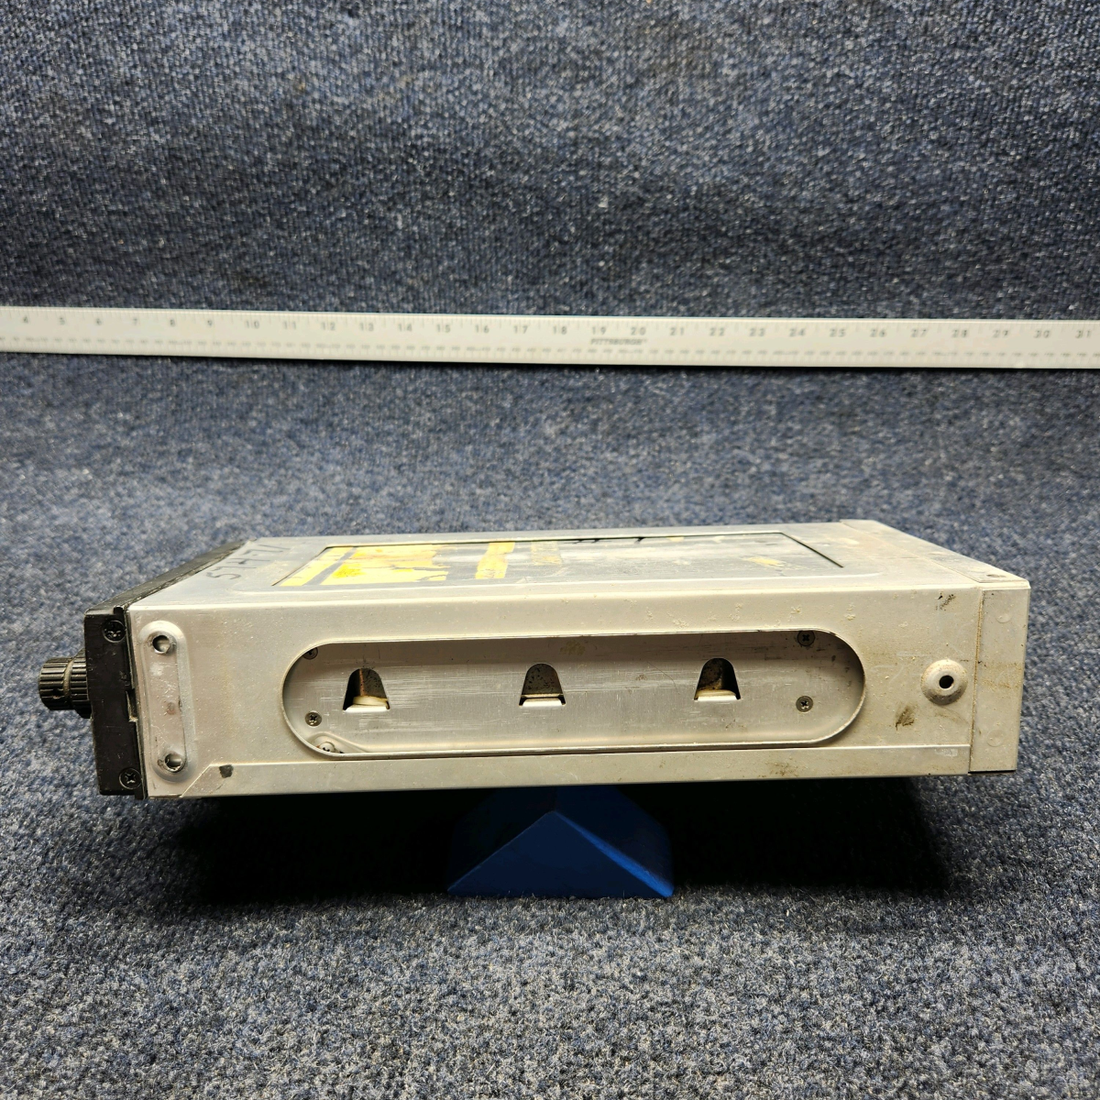 Used aircraft parts for sale, 069-1019-00 Mooney M20J KING KX-175B NAV/COM  W/ RACK AND CONNECTOR